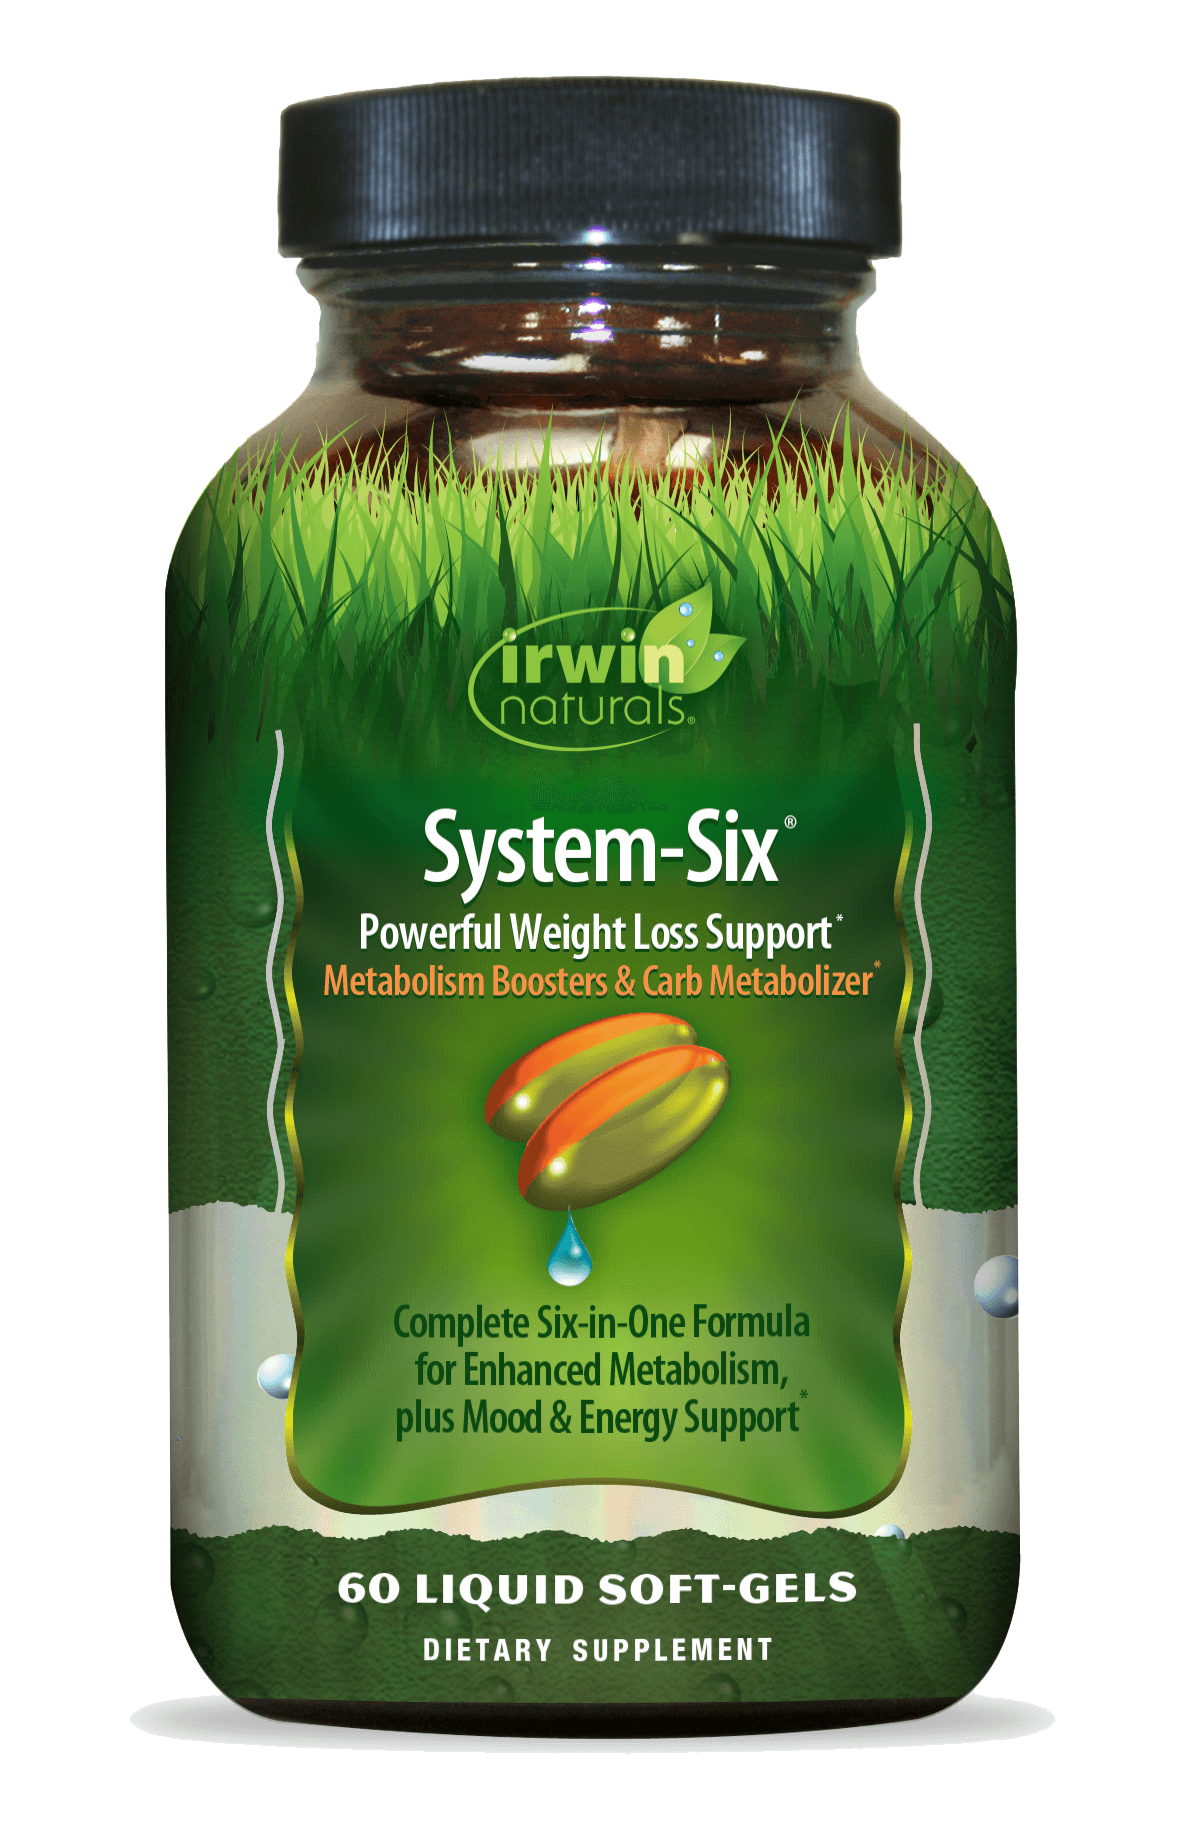 System Six Powerful Weight Loss Support by Irwin Naturals